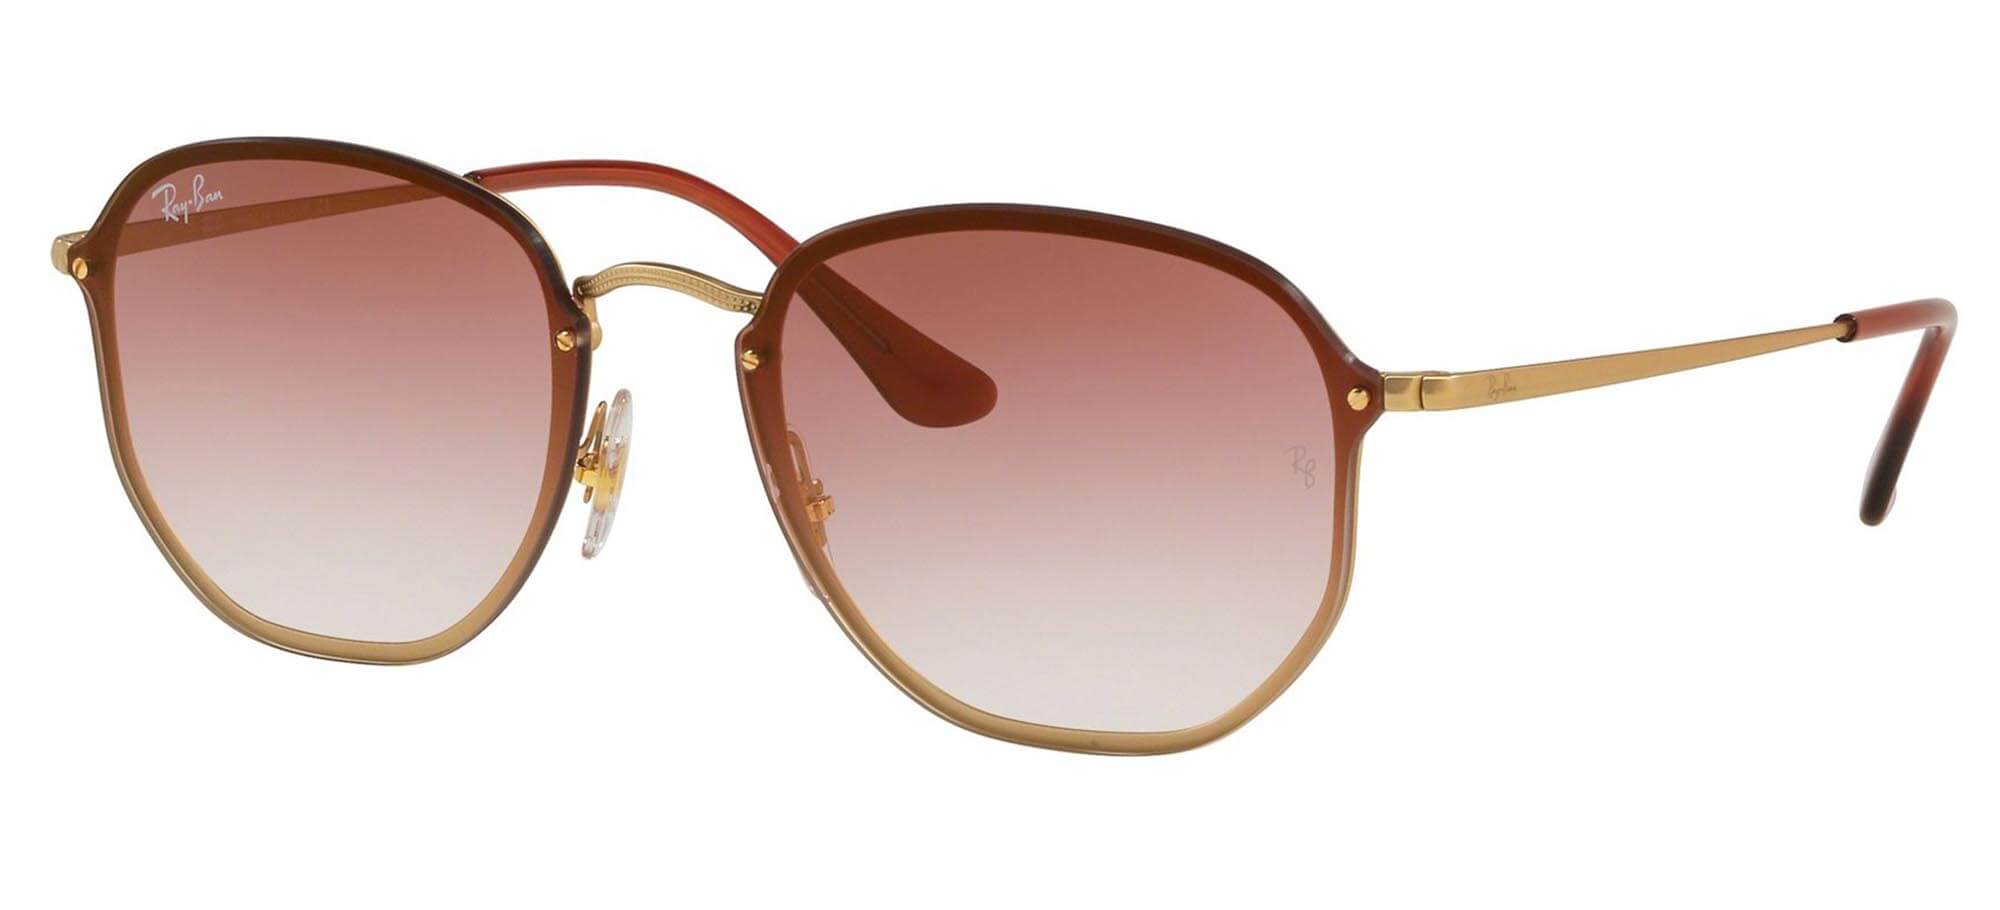 Ray-BanBLAZE HEXAGONAL RB 3579NGold/brown Pink Shaded (9140/0T)